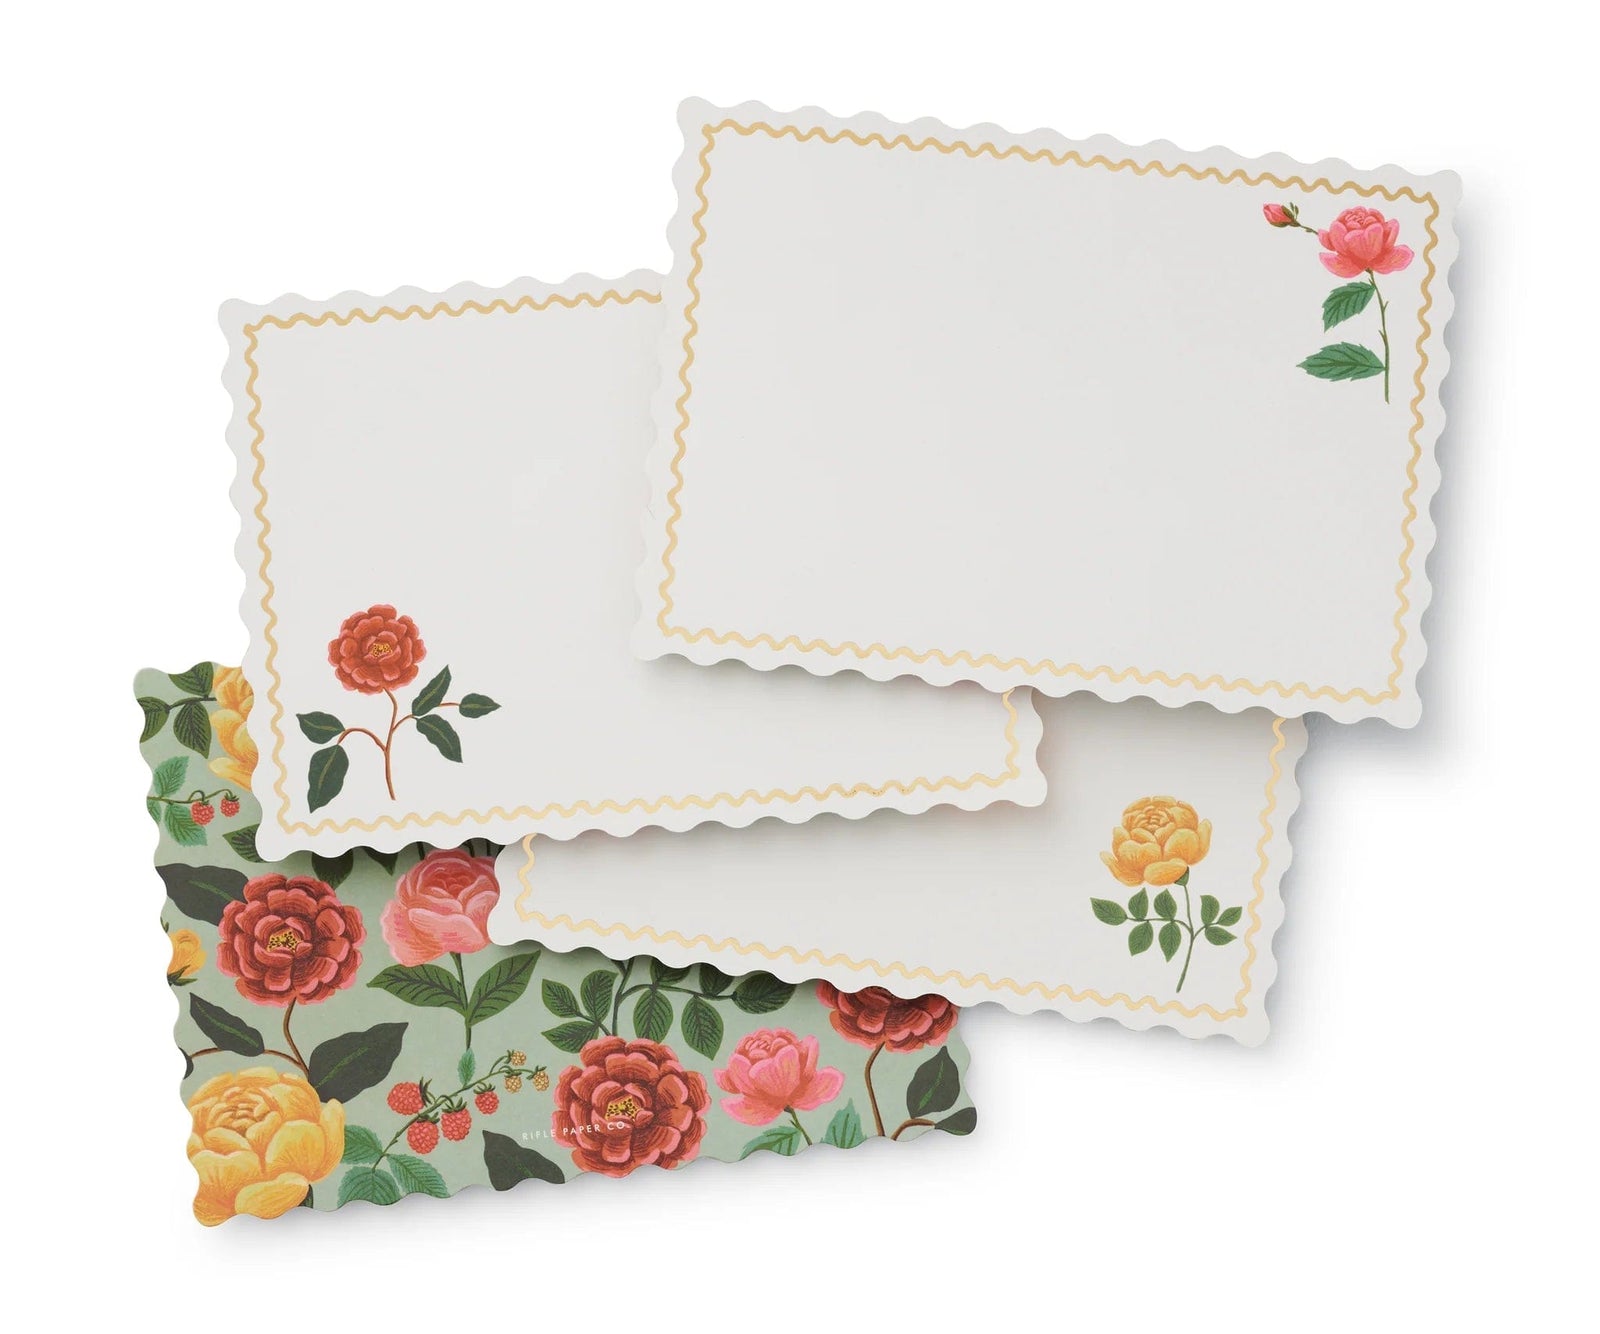 Rifle Paper Co. Social Stationery Set - Roses